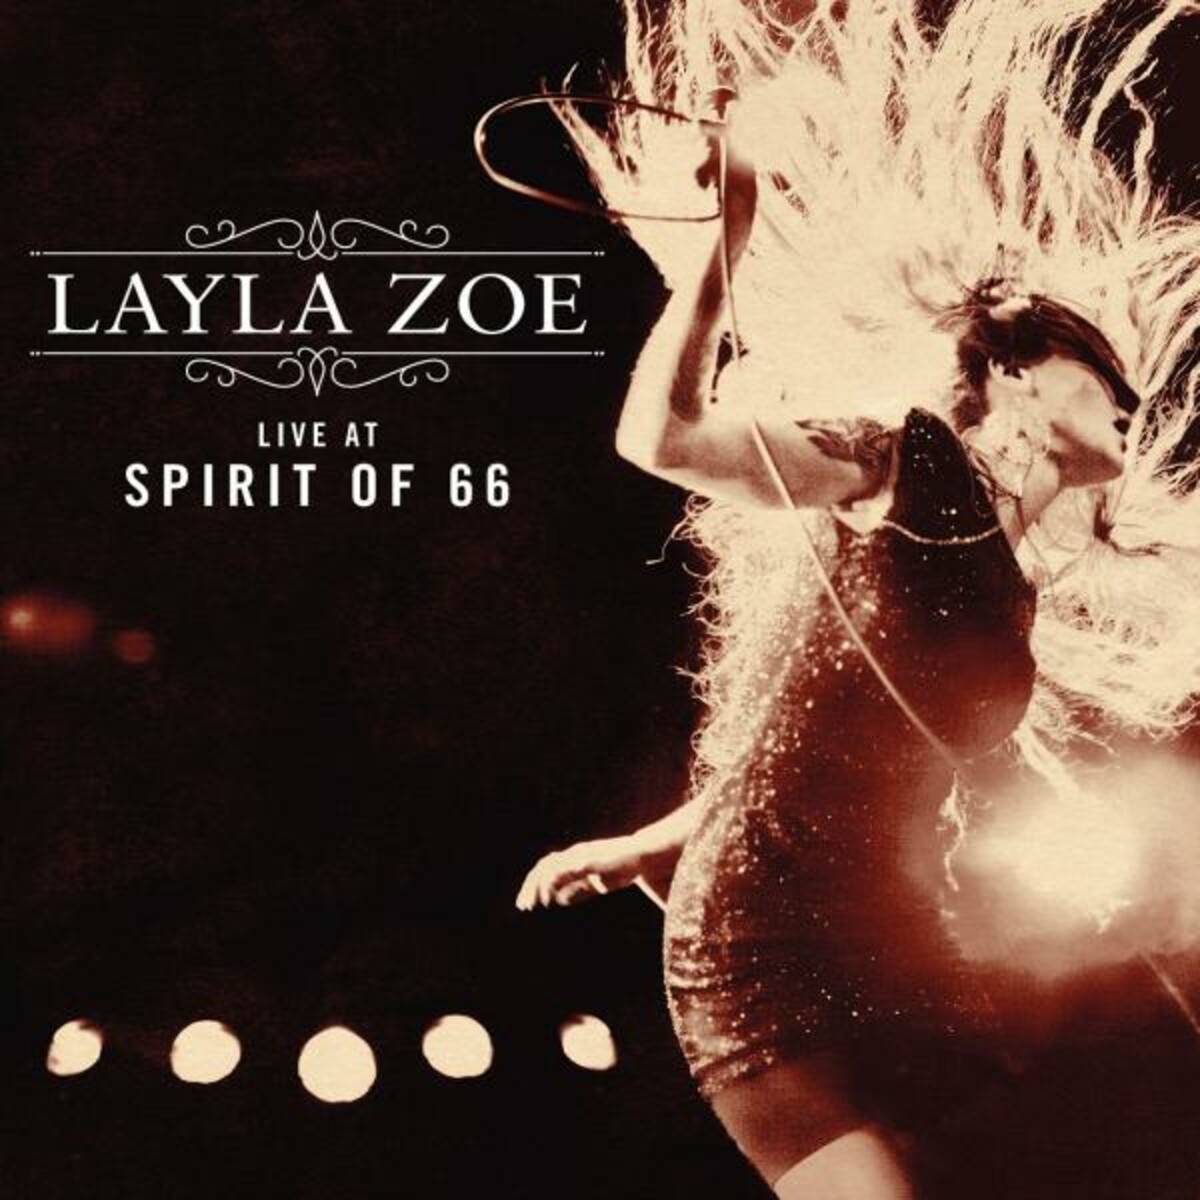 Layla Zoe - 2015 - Live at Spirit of 66 (flac+mp3)